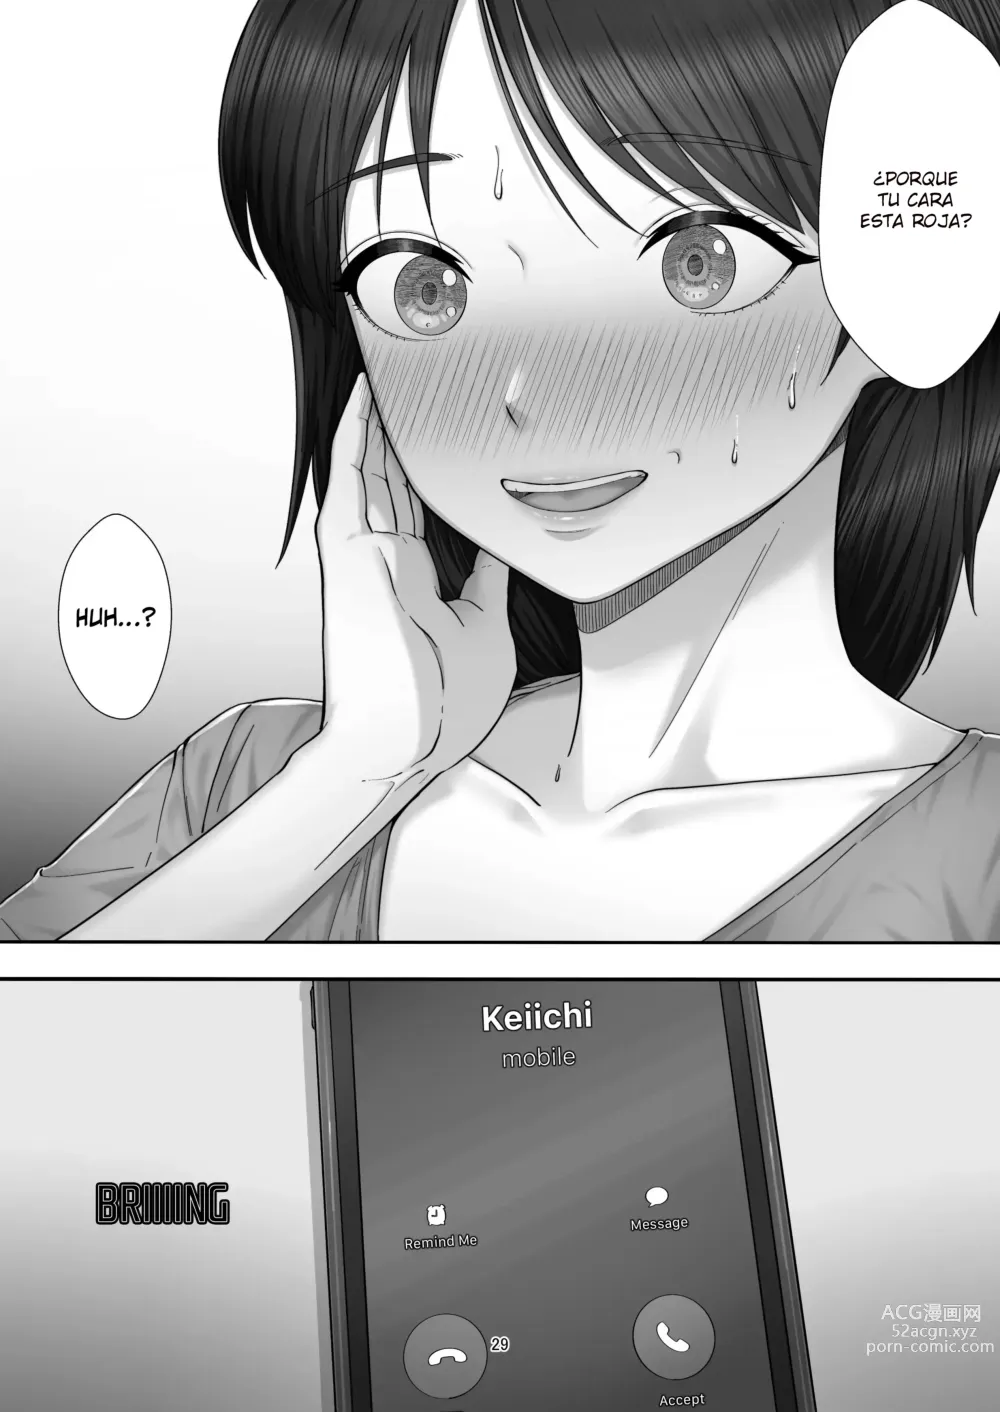 Page 27 of doujinshi When I Ordered a Call Girl My Mom Actually Showed Up